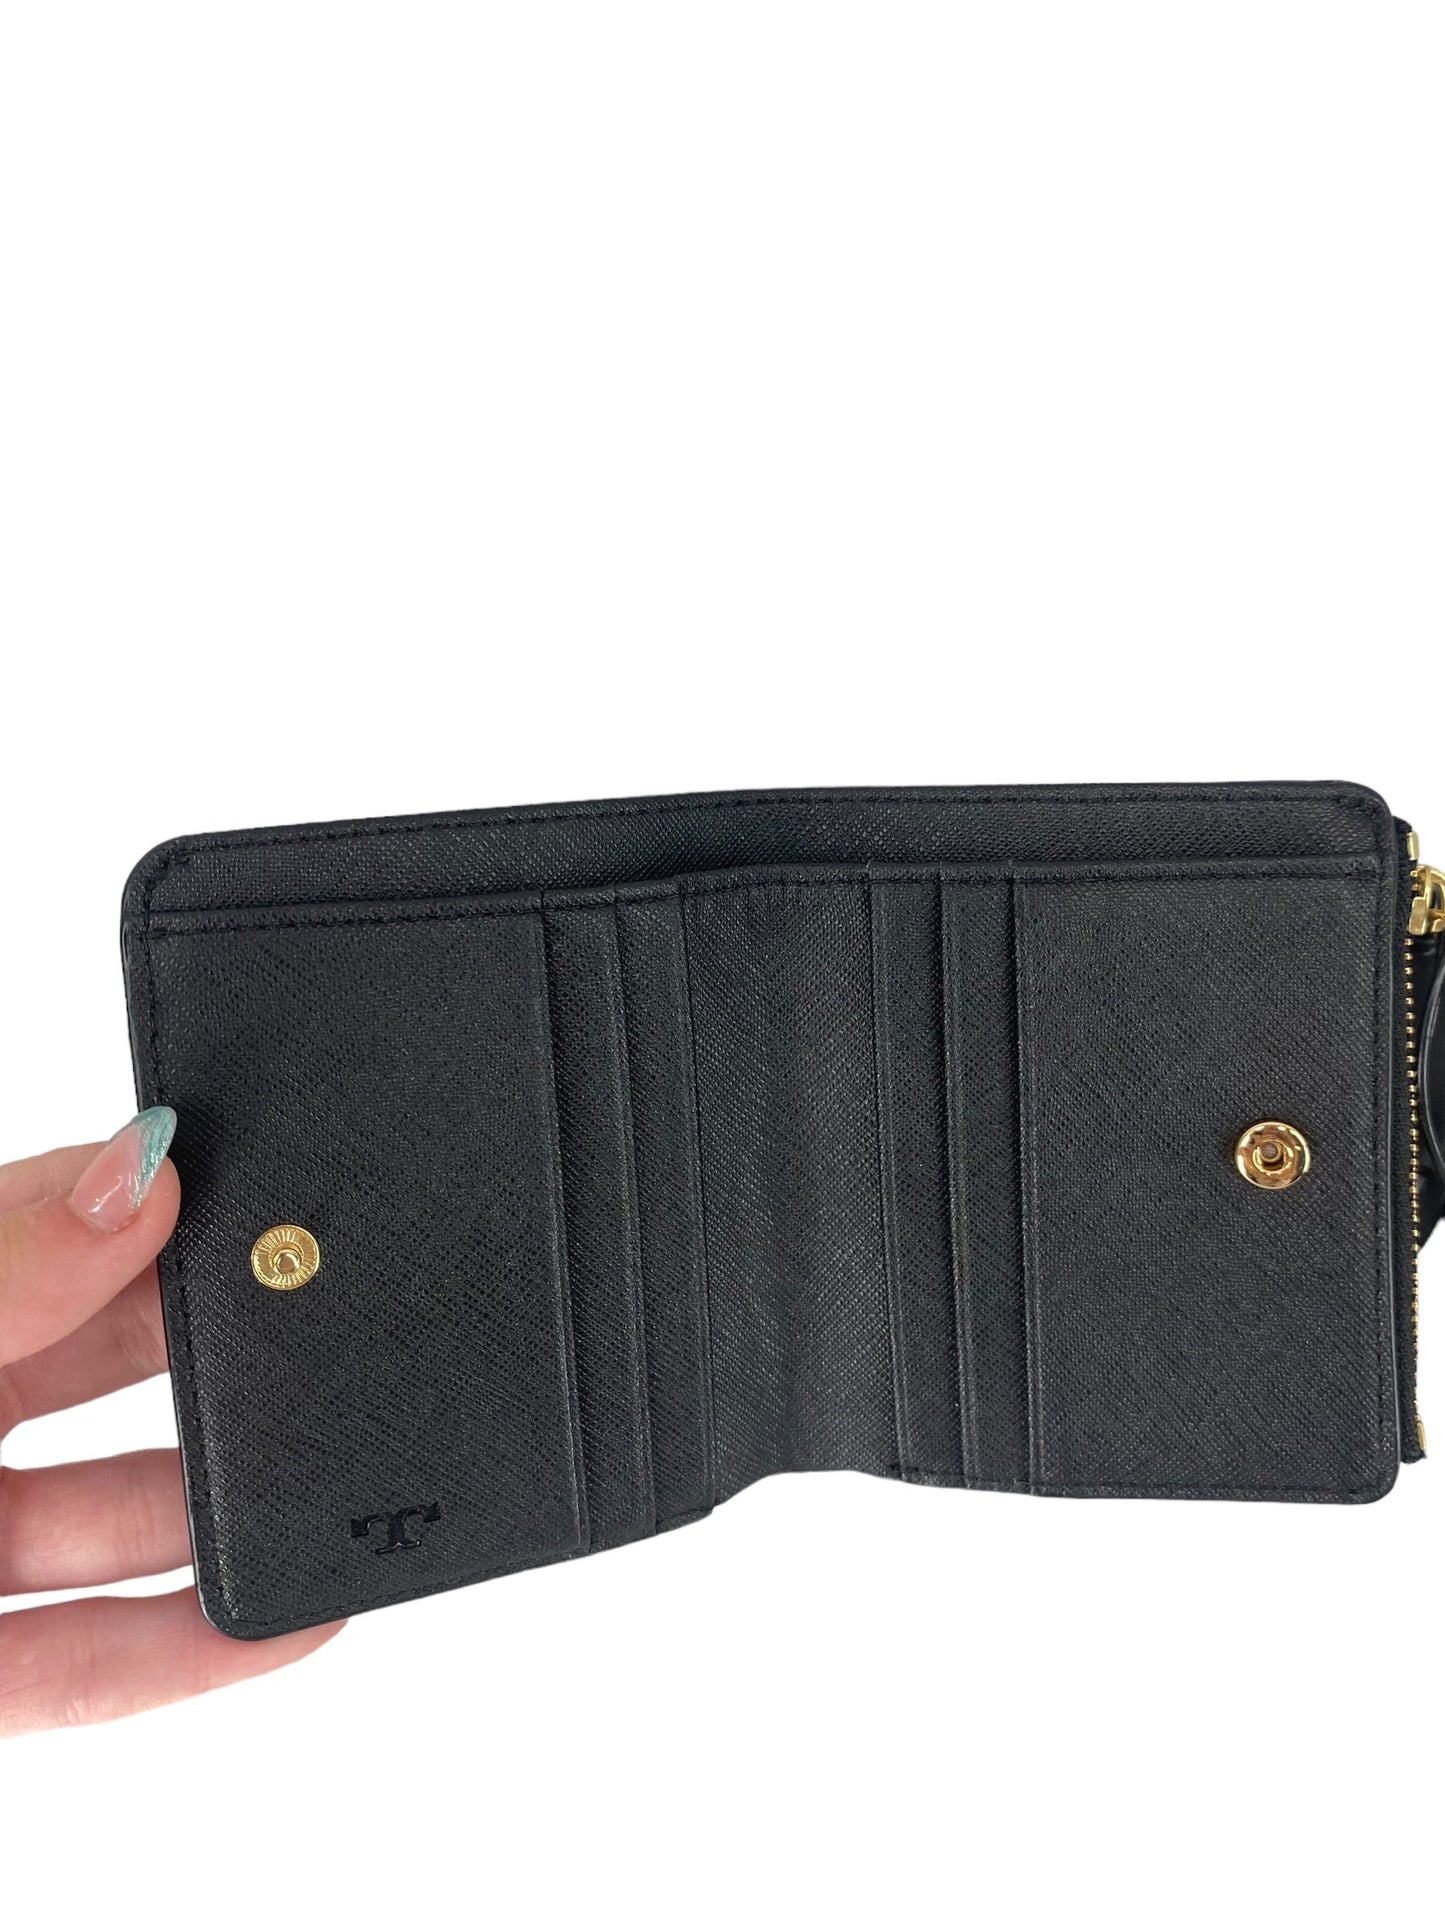 Wallet Designer Tory Burch, Size Small